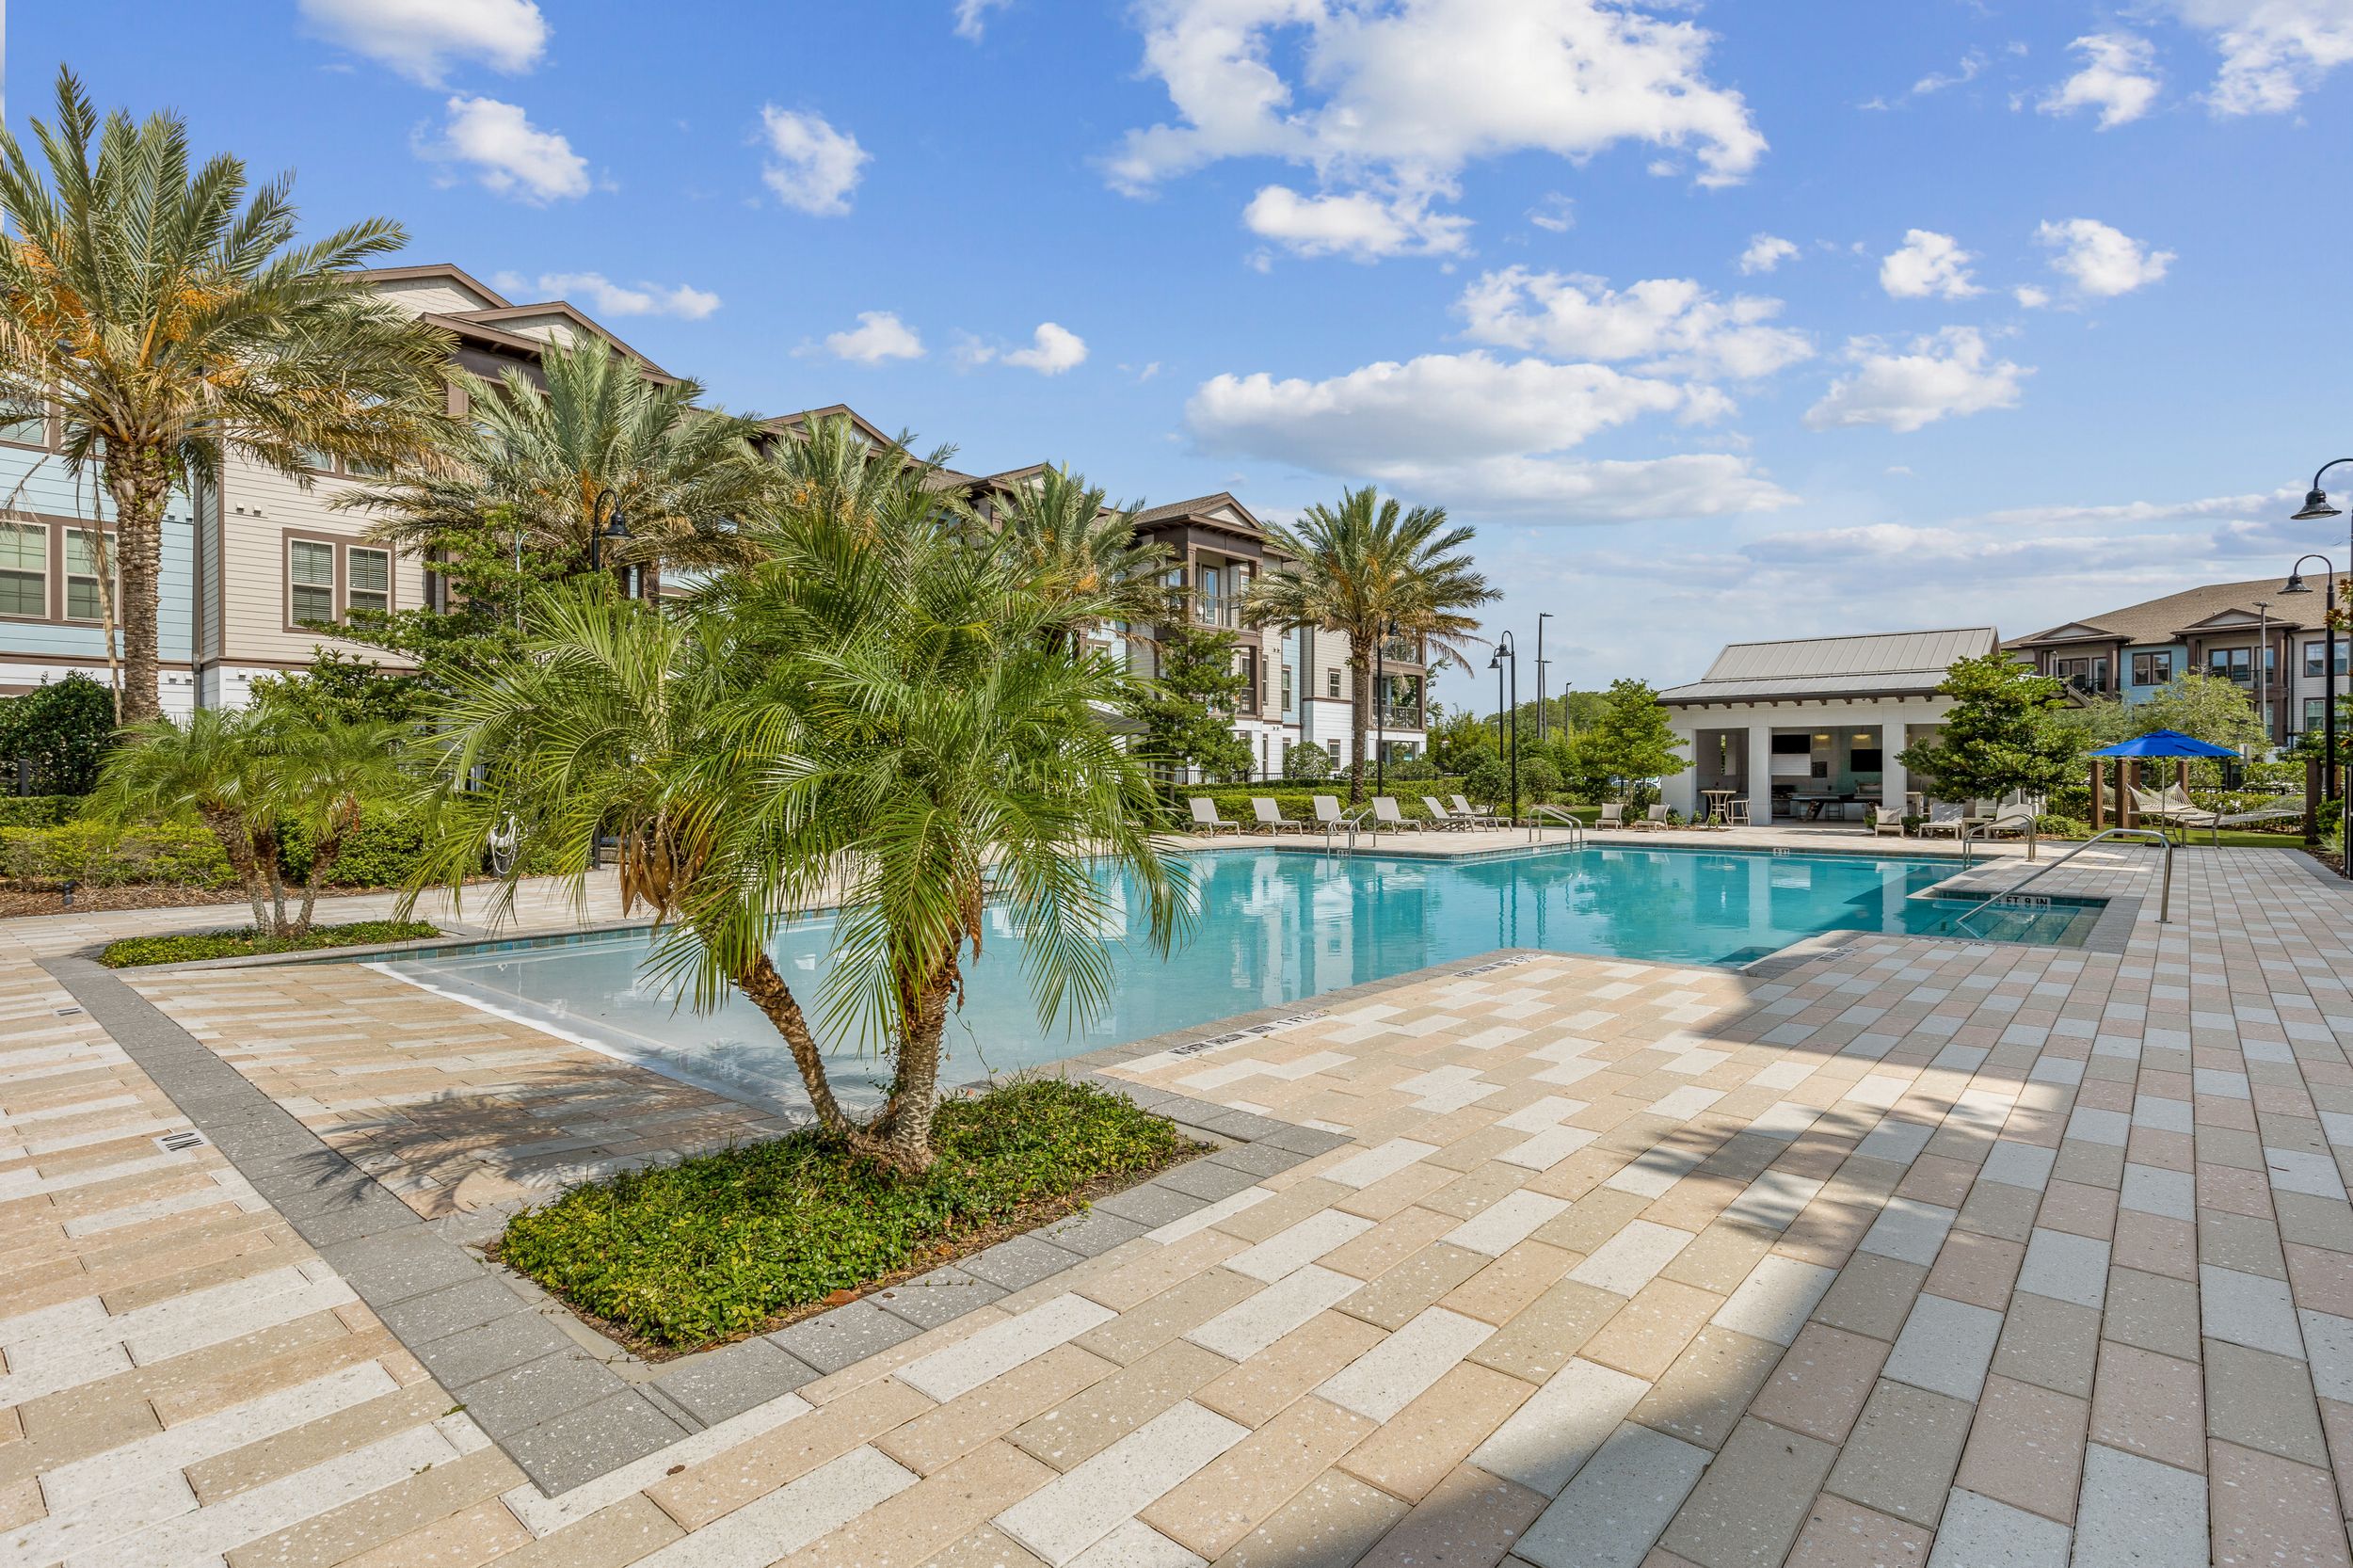 Resort-like pool with palm trees, a sundeck, and private cabanas at Lantower Grande Flats Apartments.